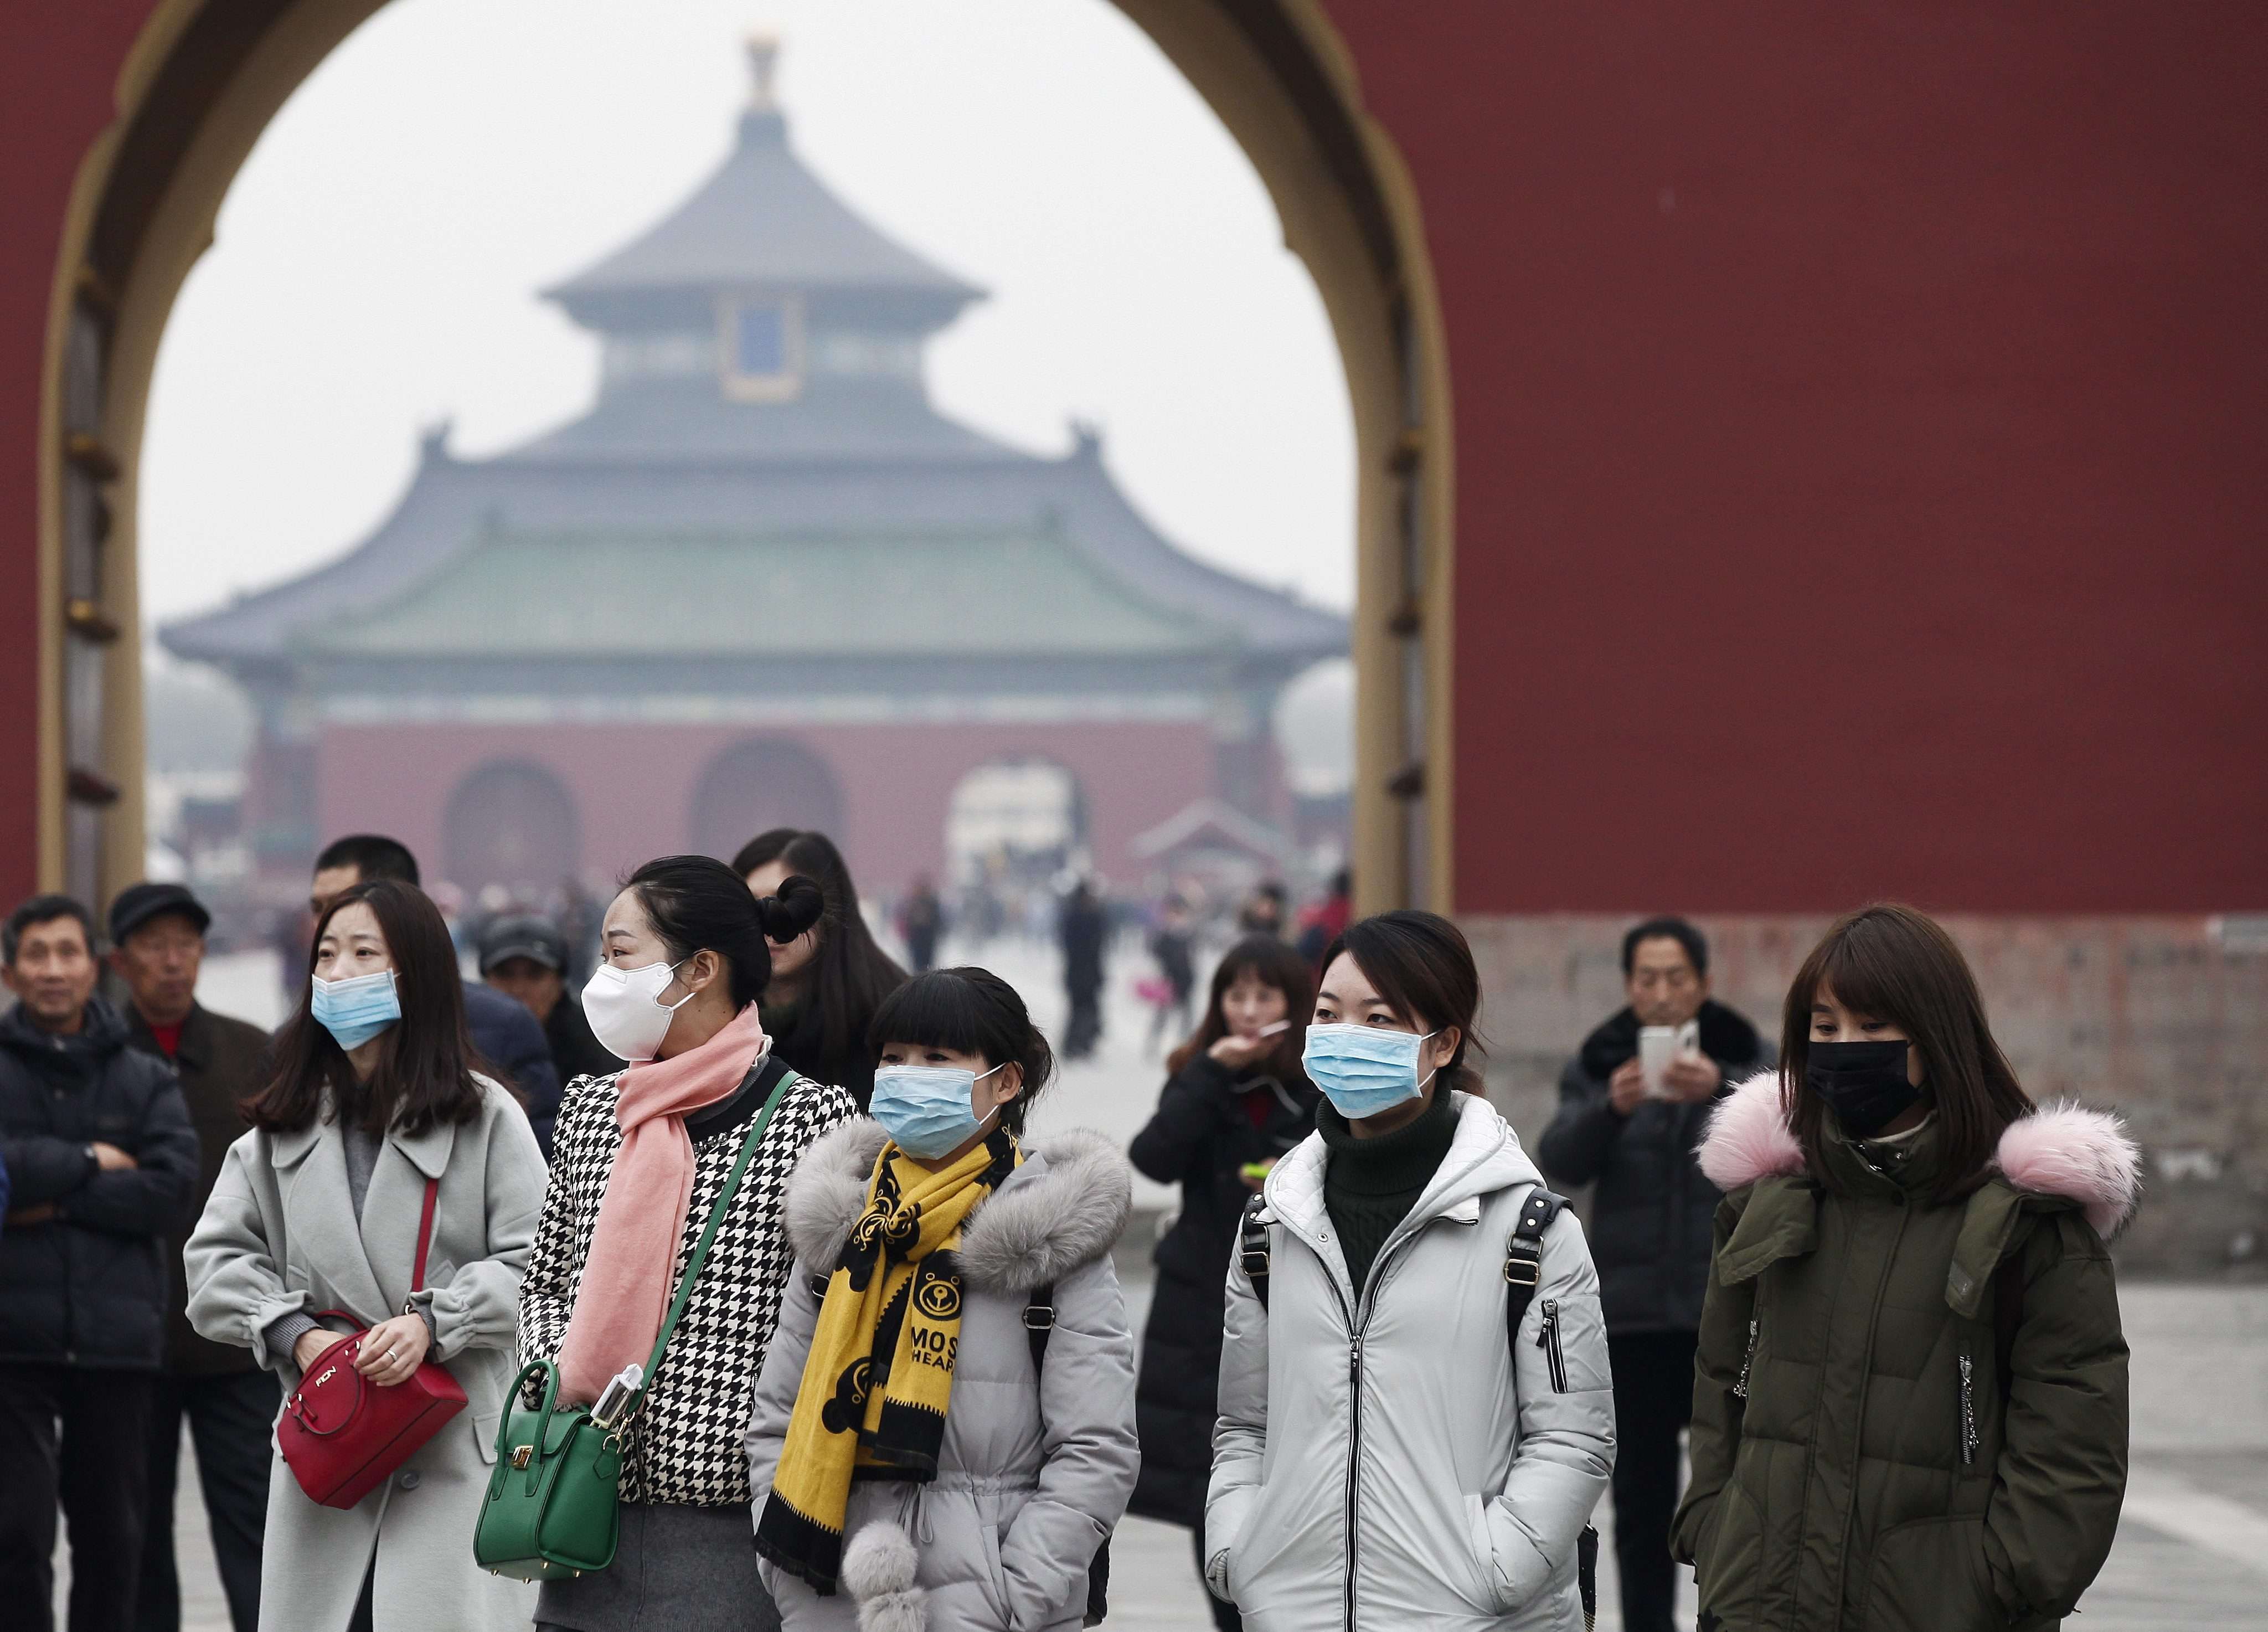 Tourists wear protective masks while going around Tiantan Park in Beijing. The active Sino-US cooperation on climate under Barack Obama will end with Trump, analysts say. Photo: EPA